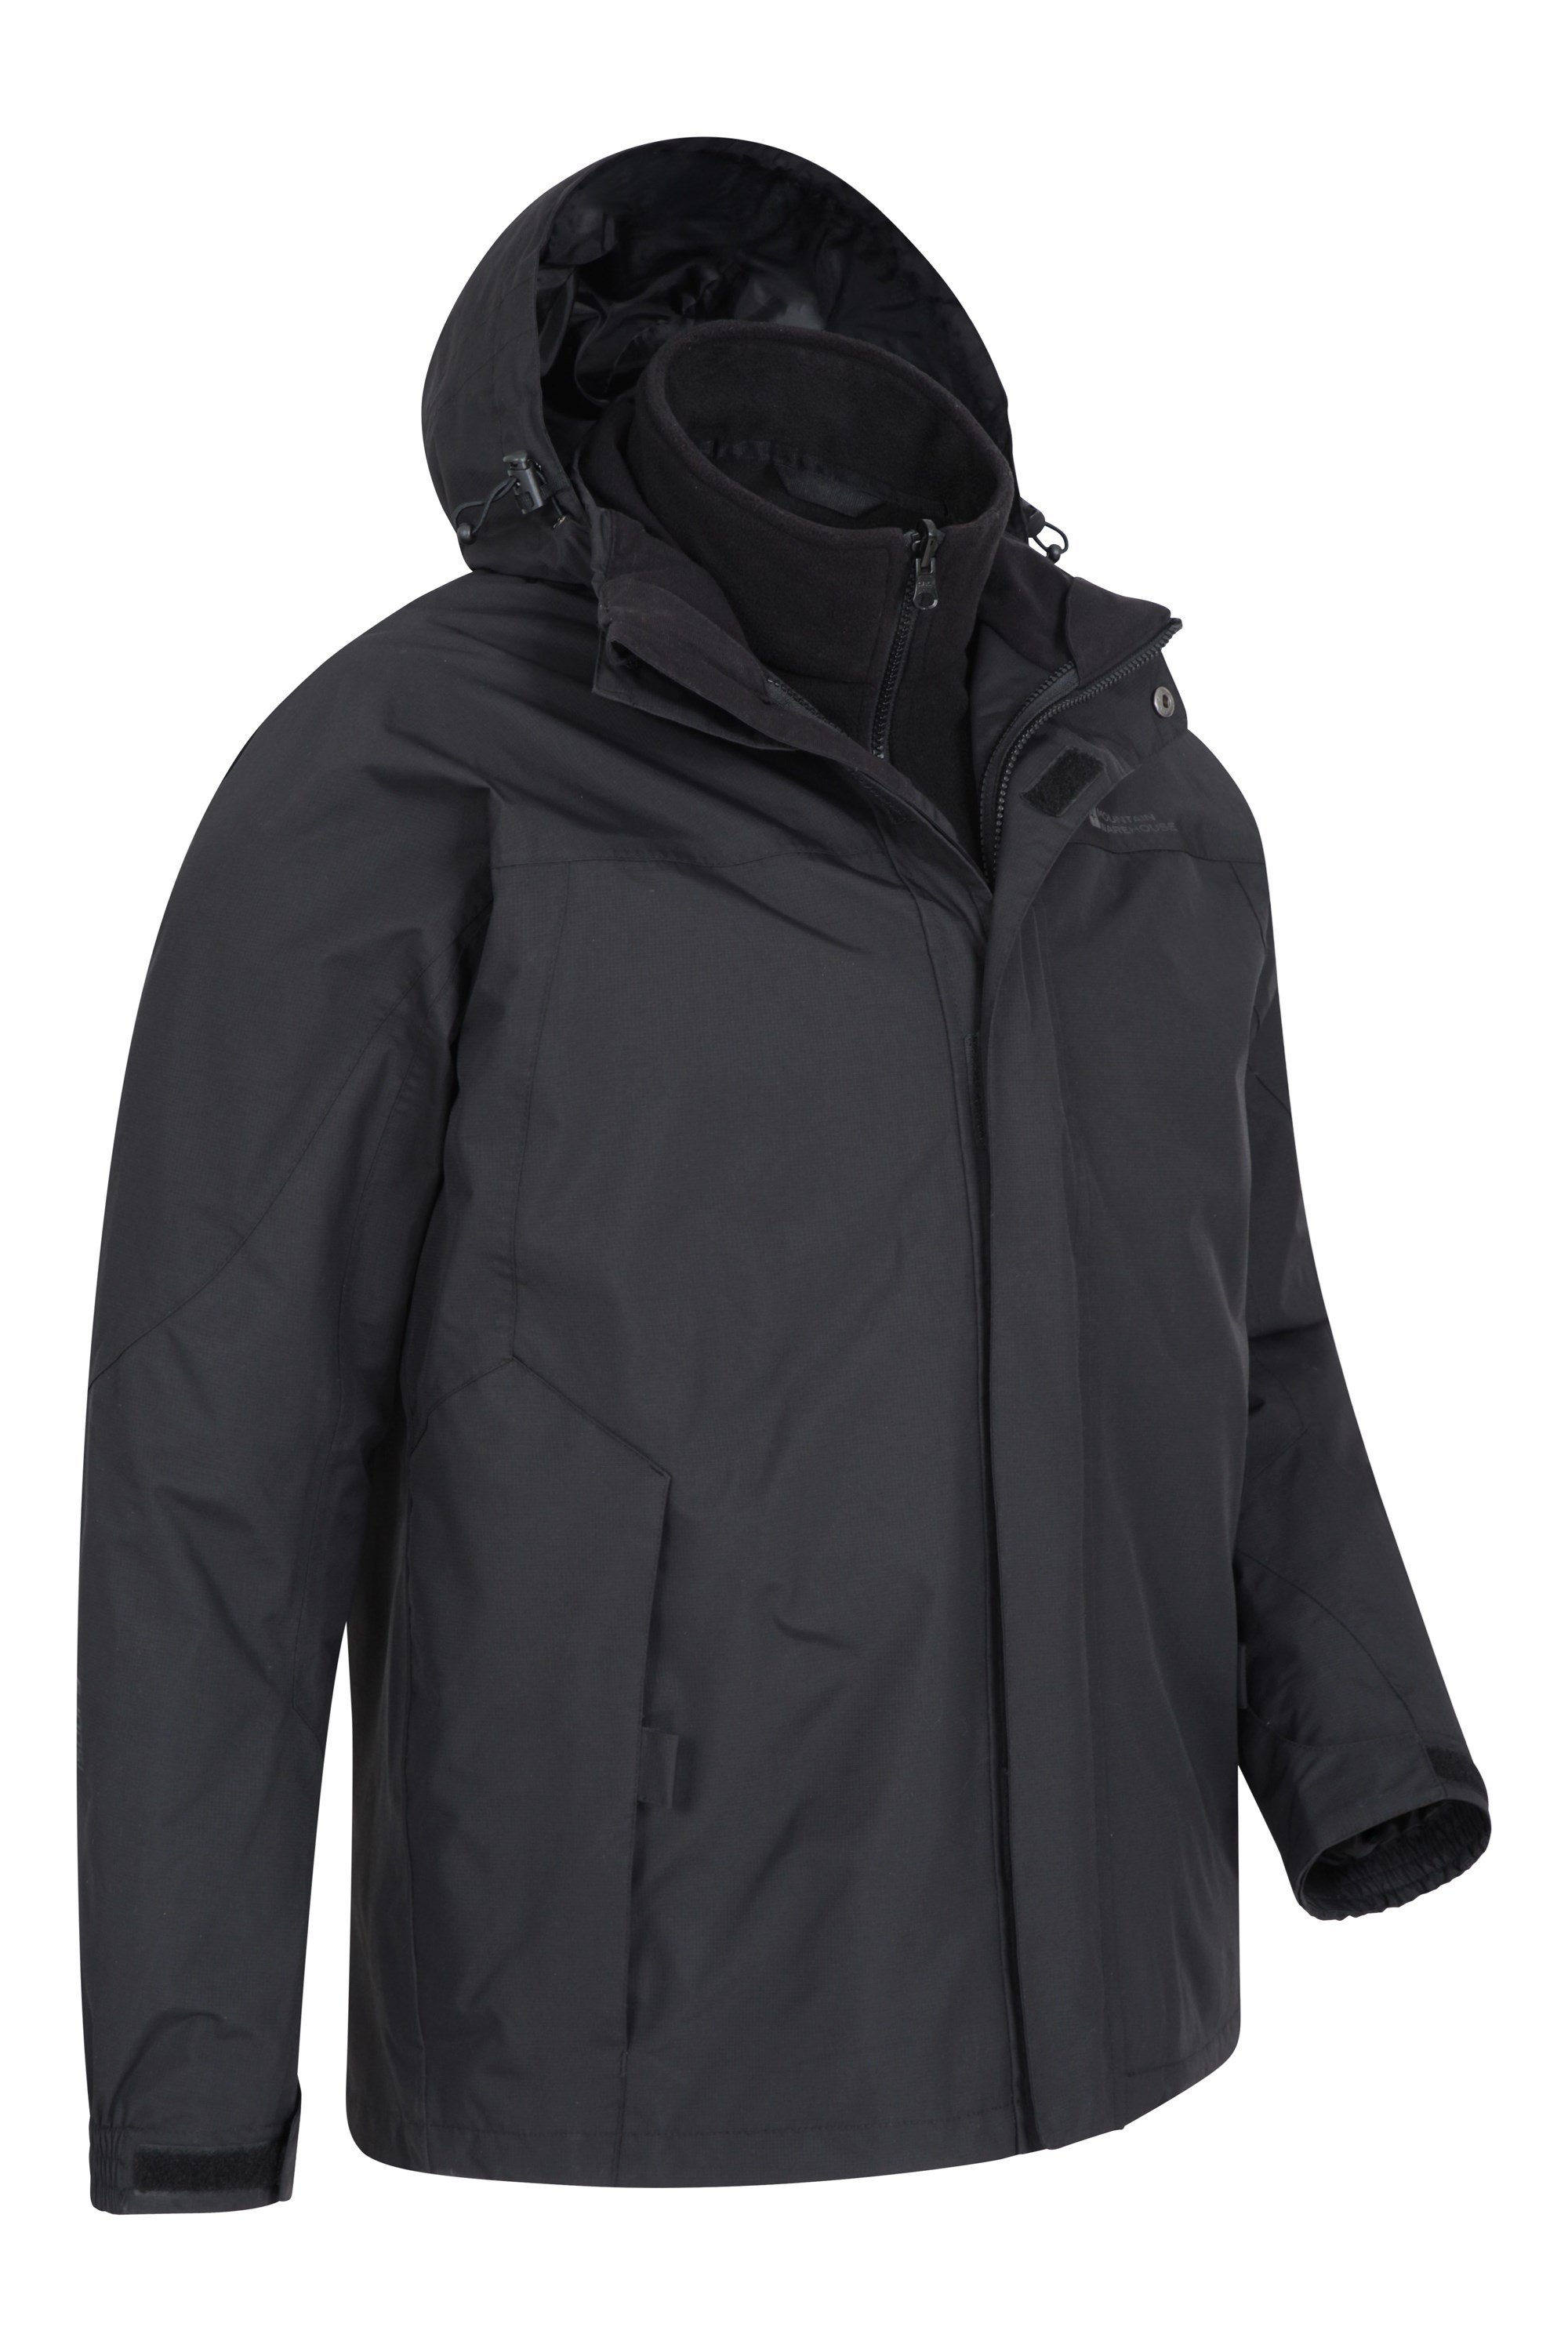 Mountain Warehouse Mens Jacket Water-Resistant Fabric and Longer Length 